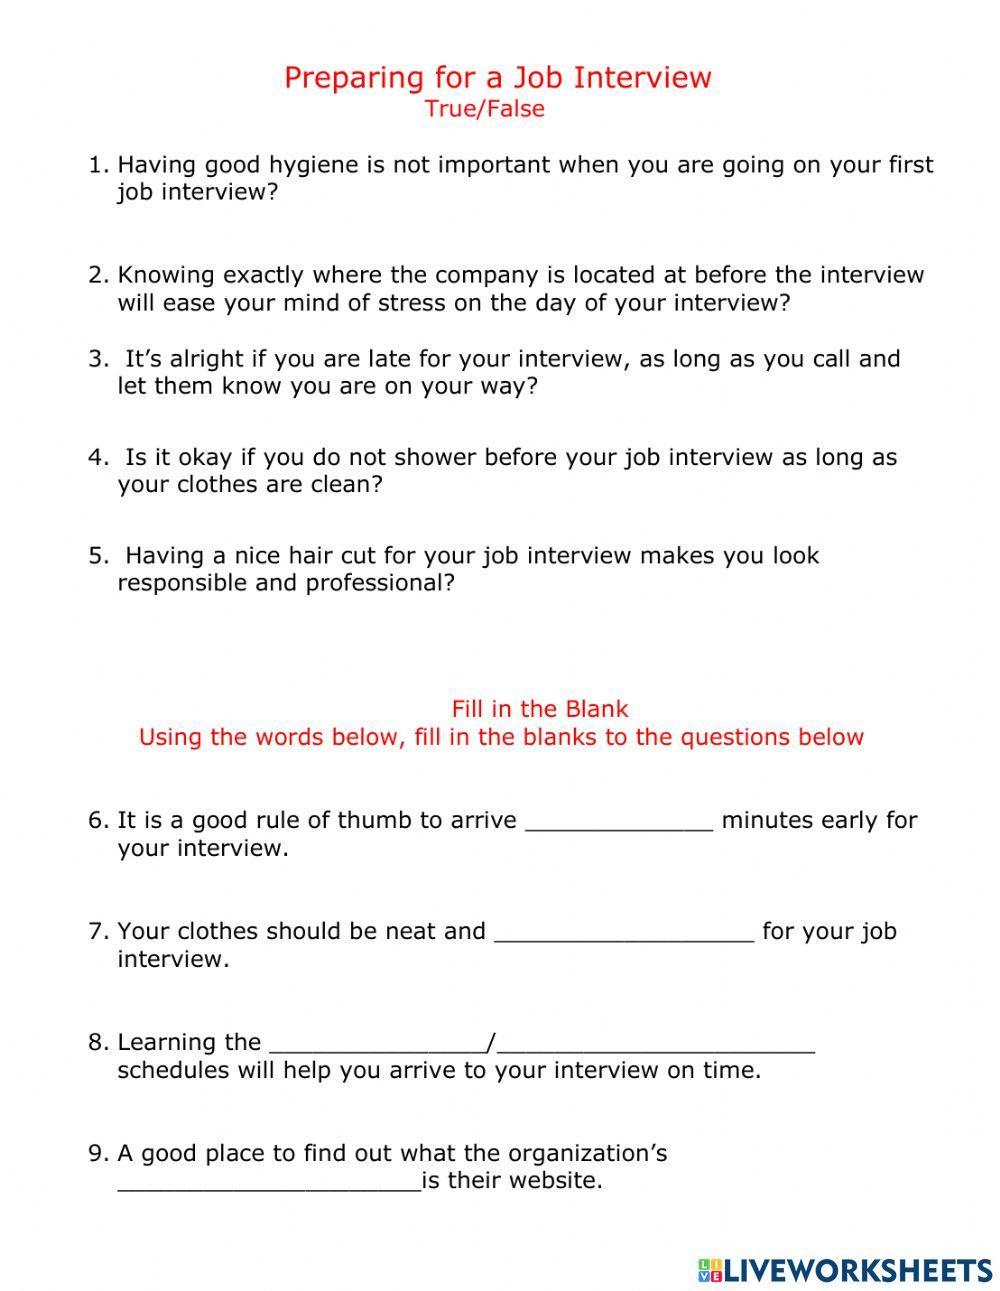 Preparing for a Job Interview